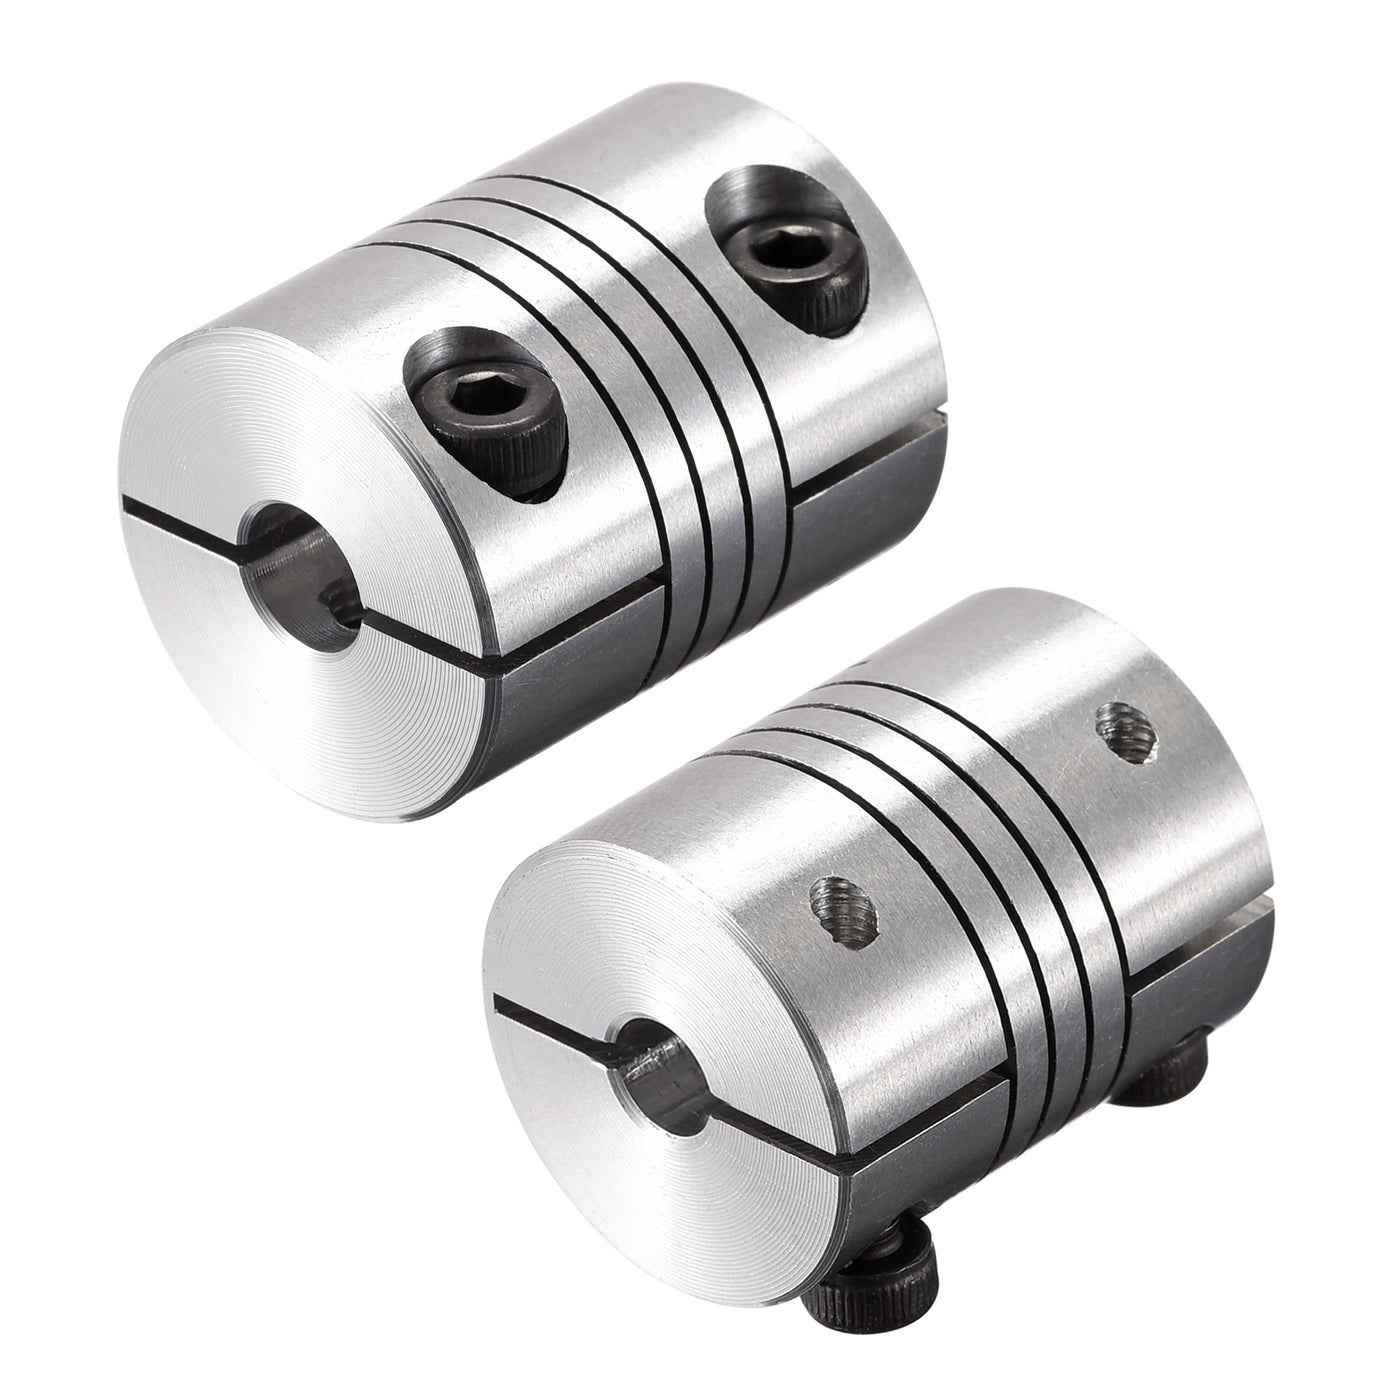 uxcell Uxcell Motor Shaft 7mm to 7mm Helical Beam Coupler Coupling 25mm Dia 30mm Length